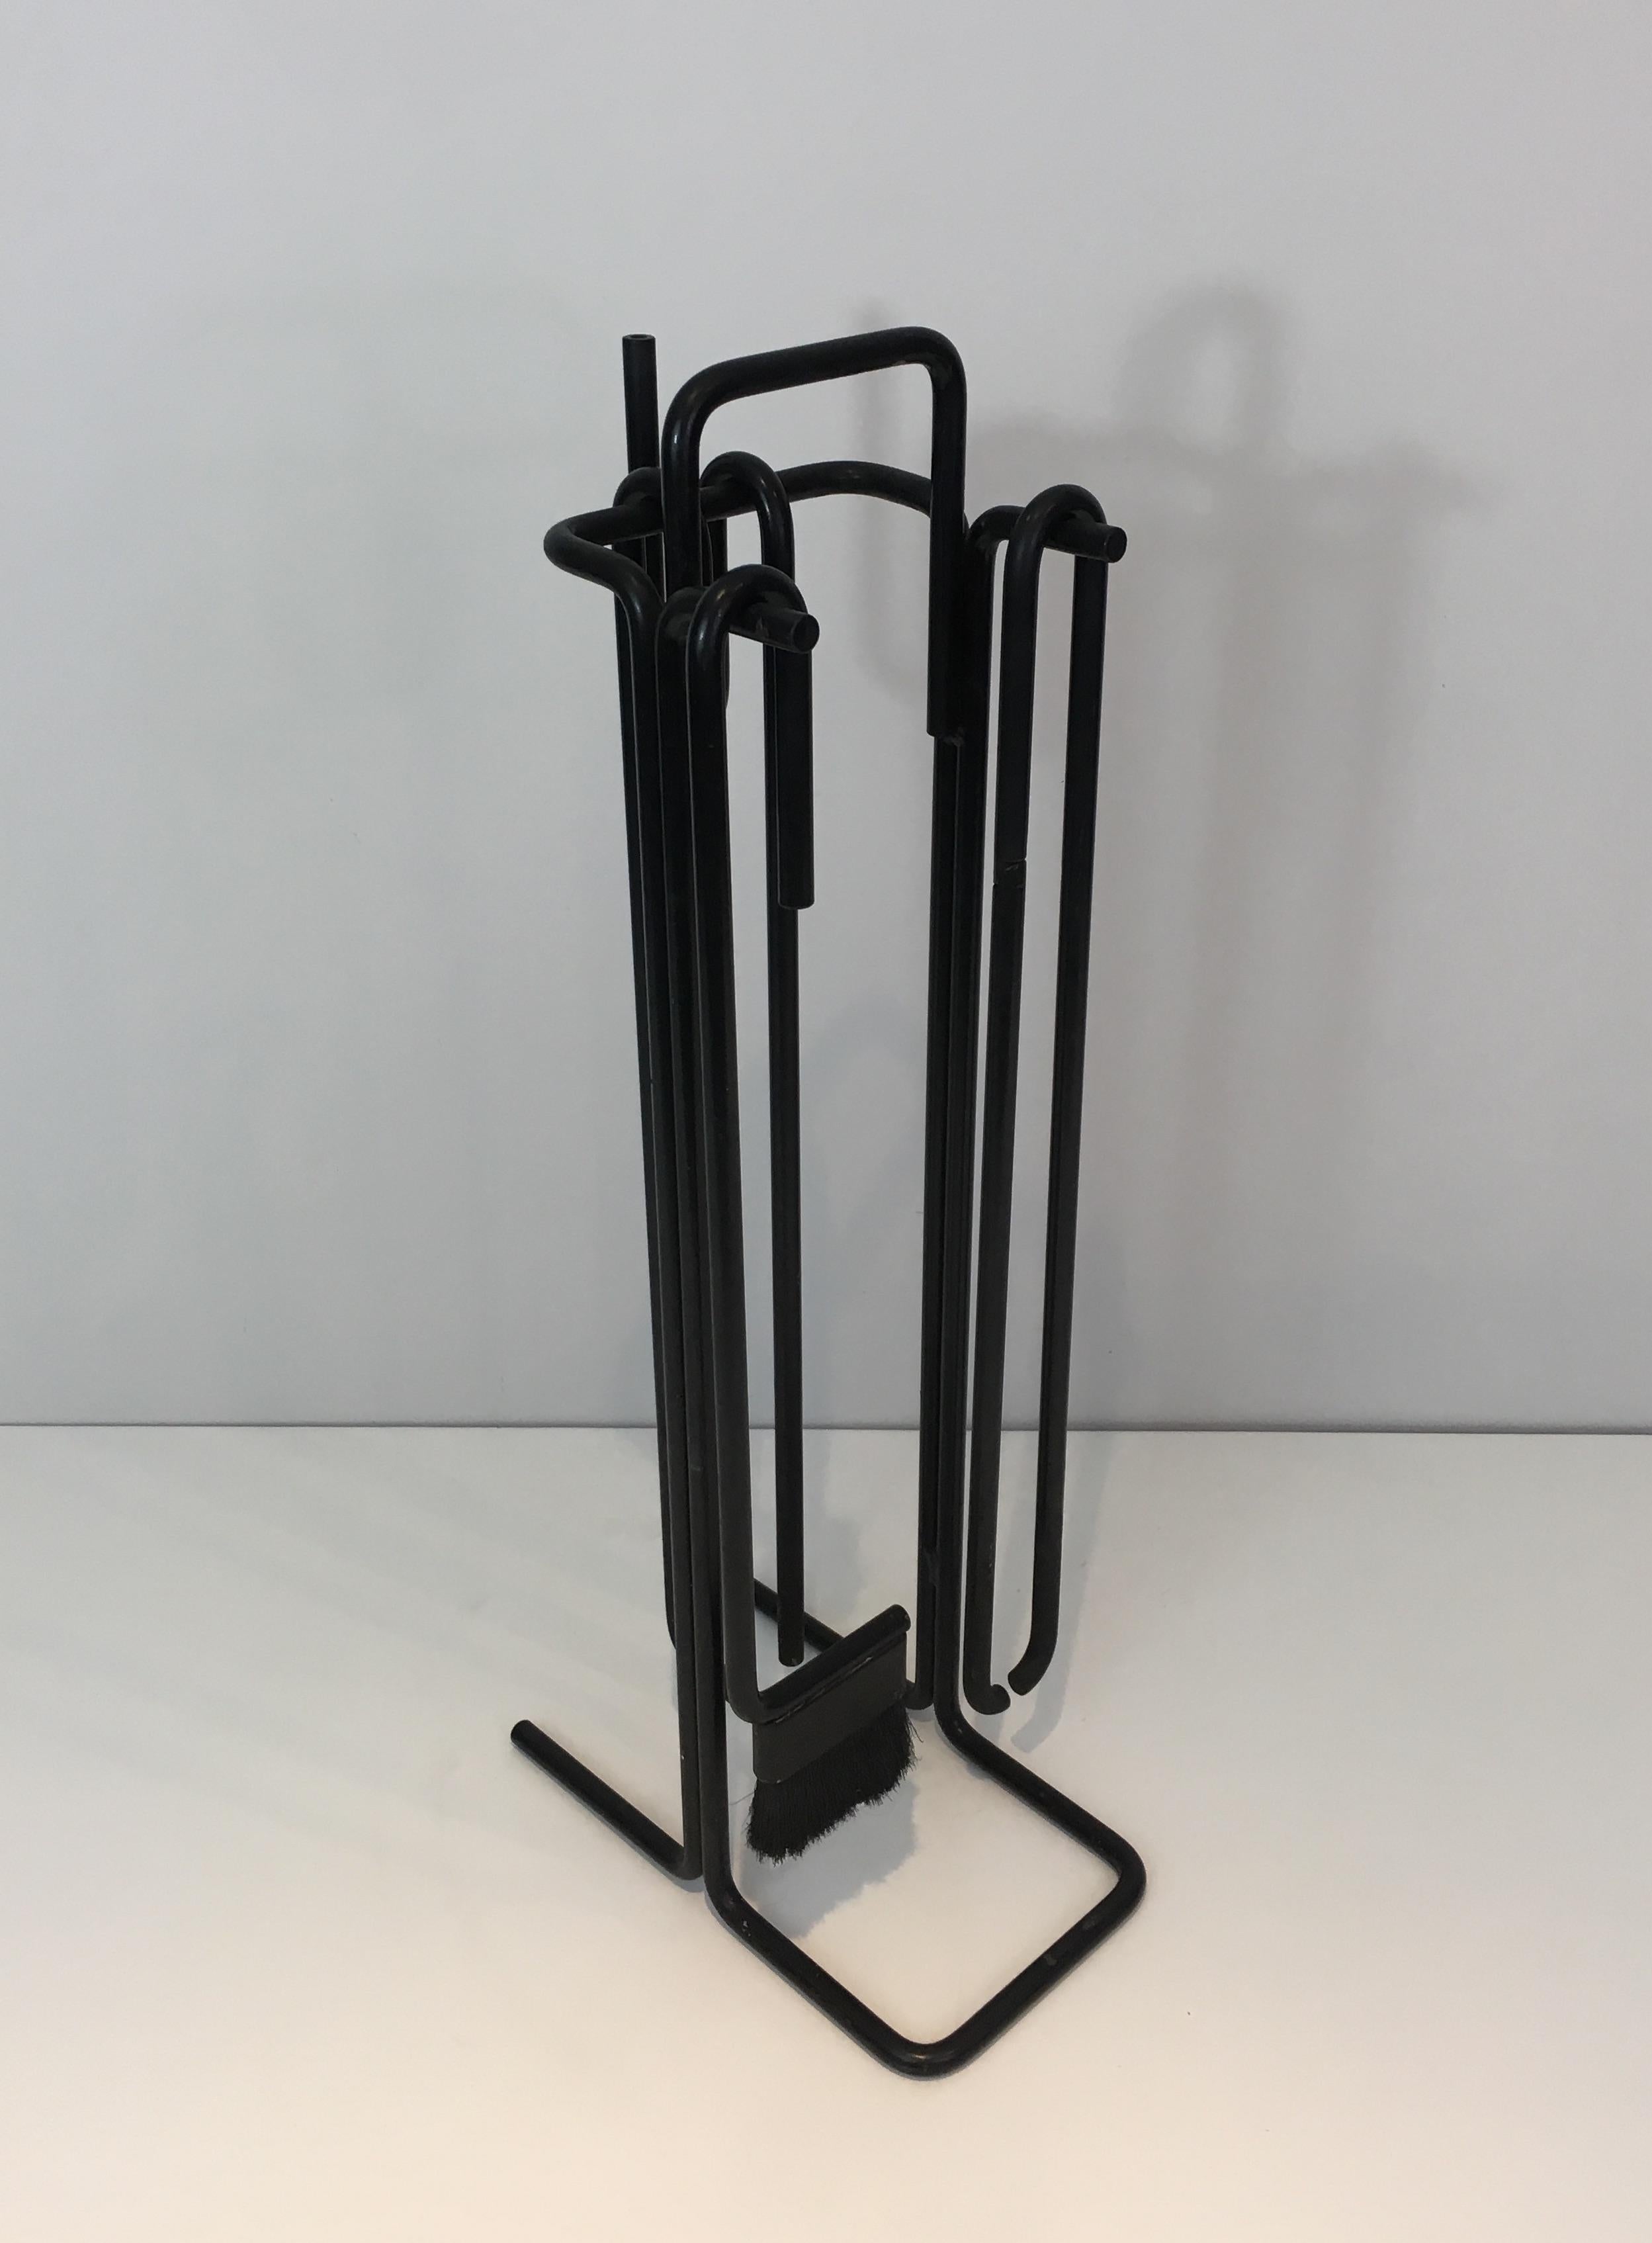 These modernist fire place tools on stand are made of black lacquered iron. The design of these fire place tools is very simple and modernist. They are French, circa 1970.